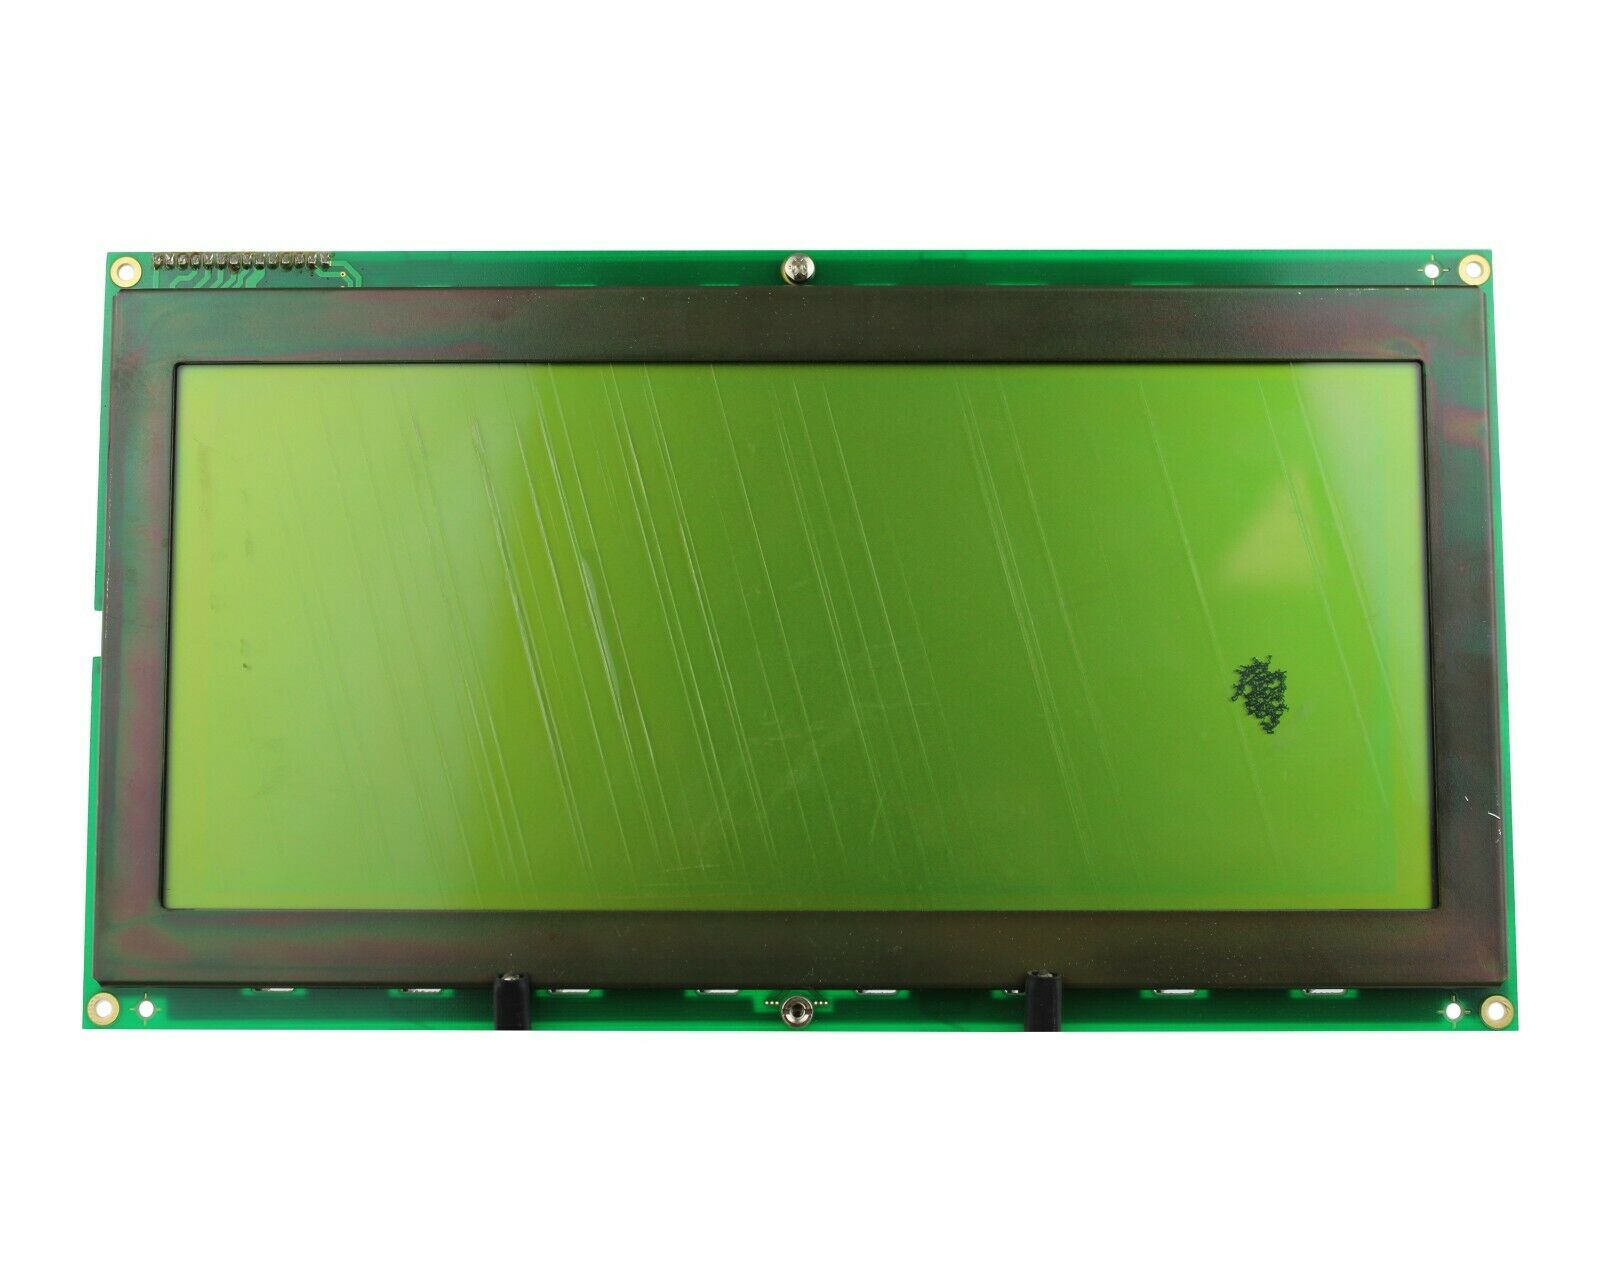 New Old Stock G649D SII G649DX5B LCD Panel